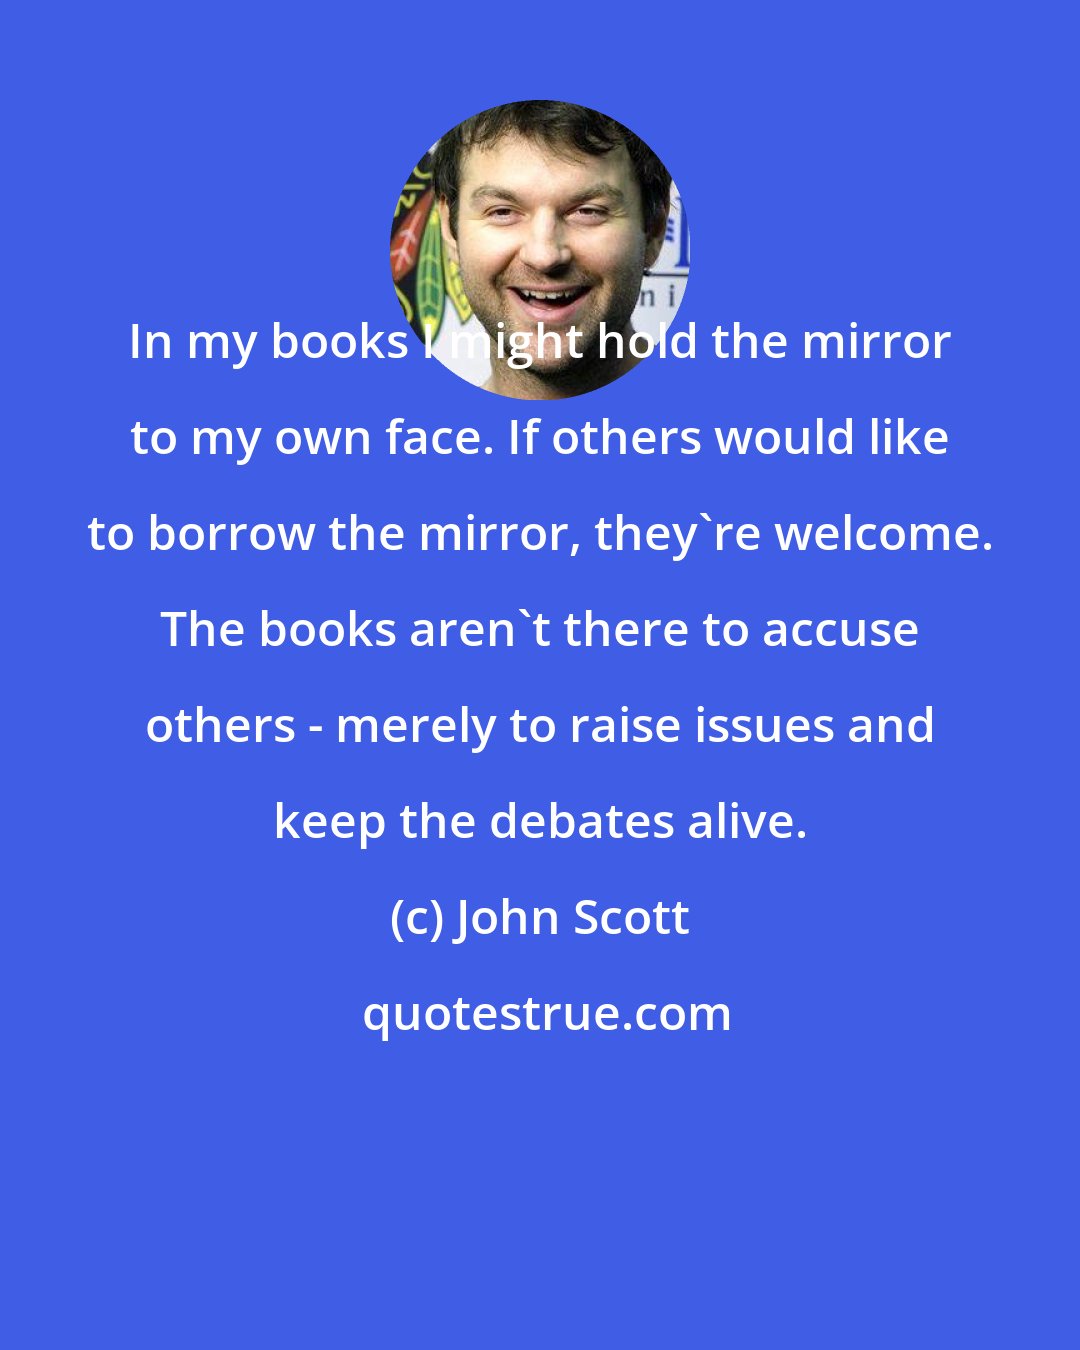 John Scott: In my books I might hold the mirror to my own face. If others would like to borrow the mirror, they're welcome. The books aren't there to accuse others - merely to raise issues and keep the debates alive.